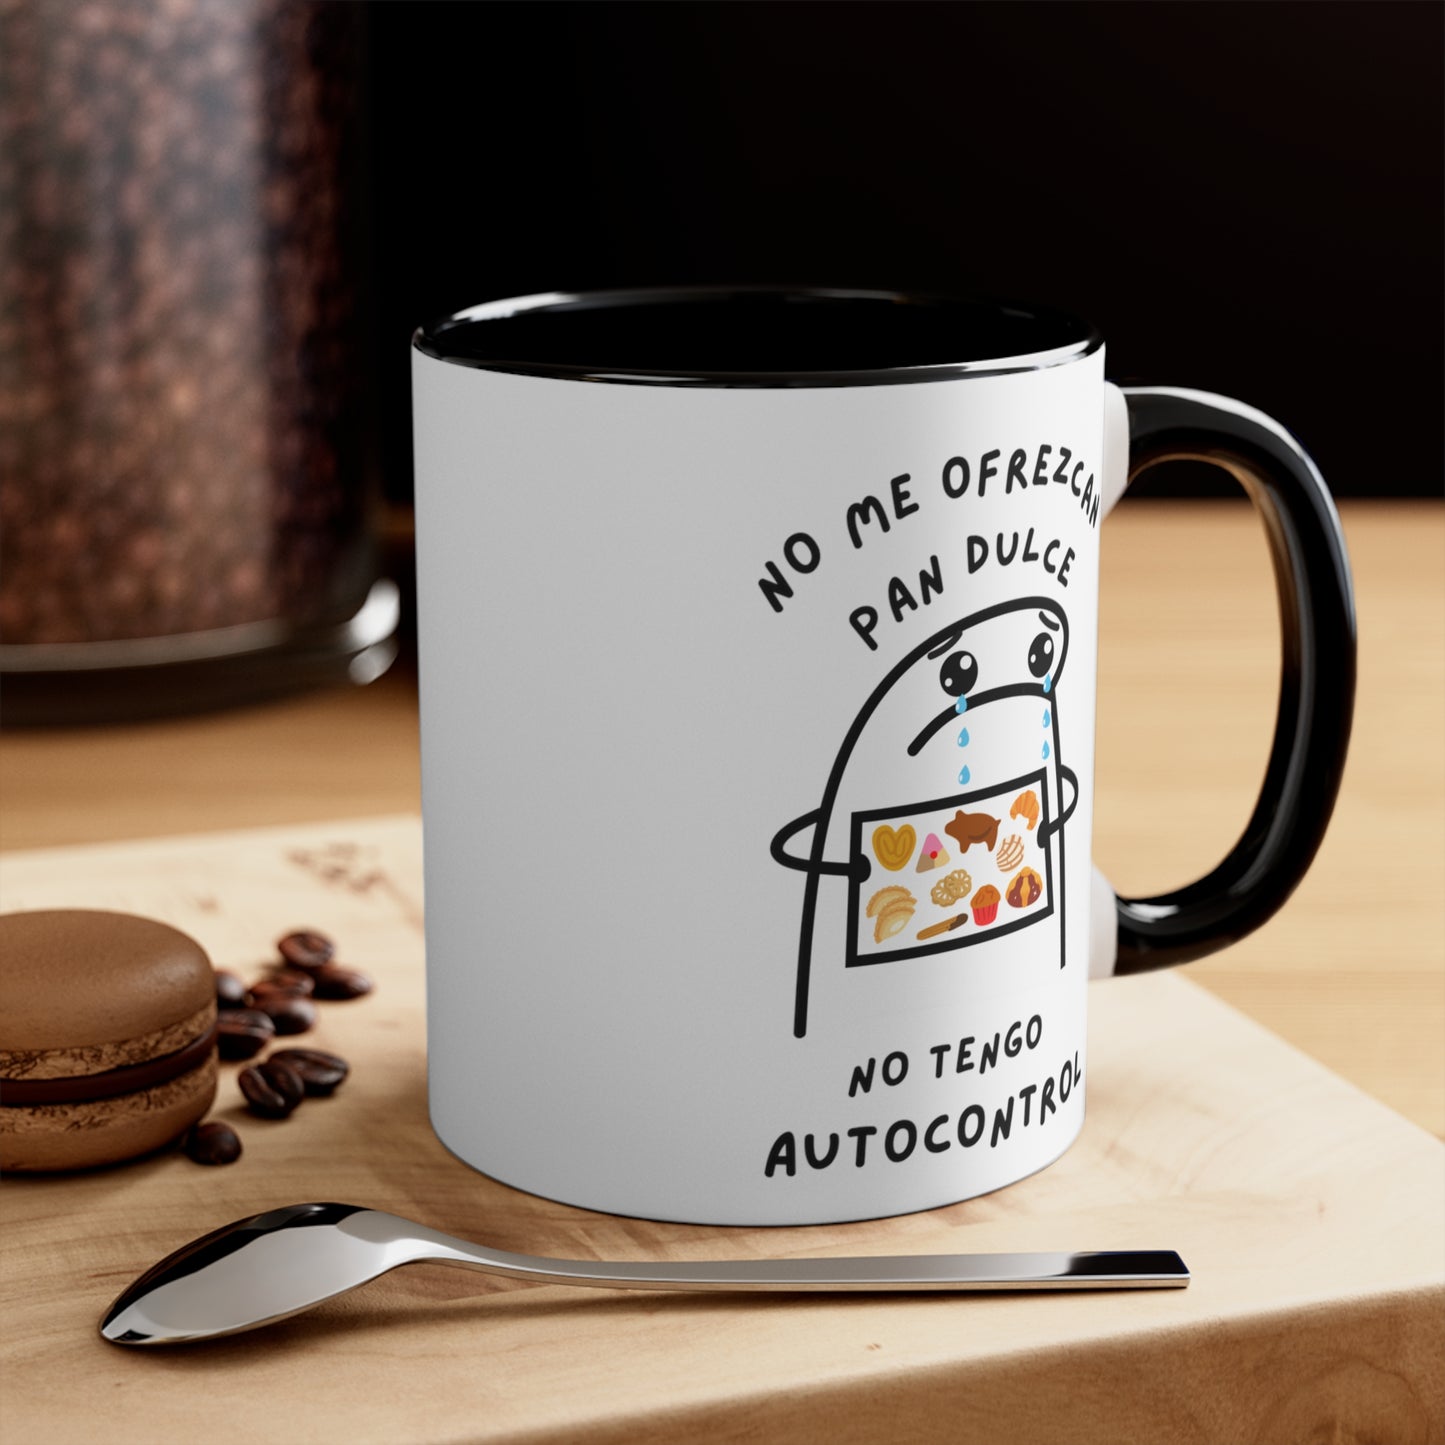 Funny Mexican Coffee Mug, 11oz for Mexican family or friends. No me ofrezcan pan dulce no tengo autocontrol.